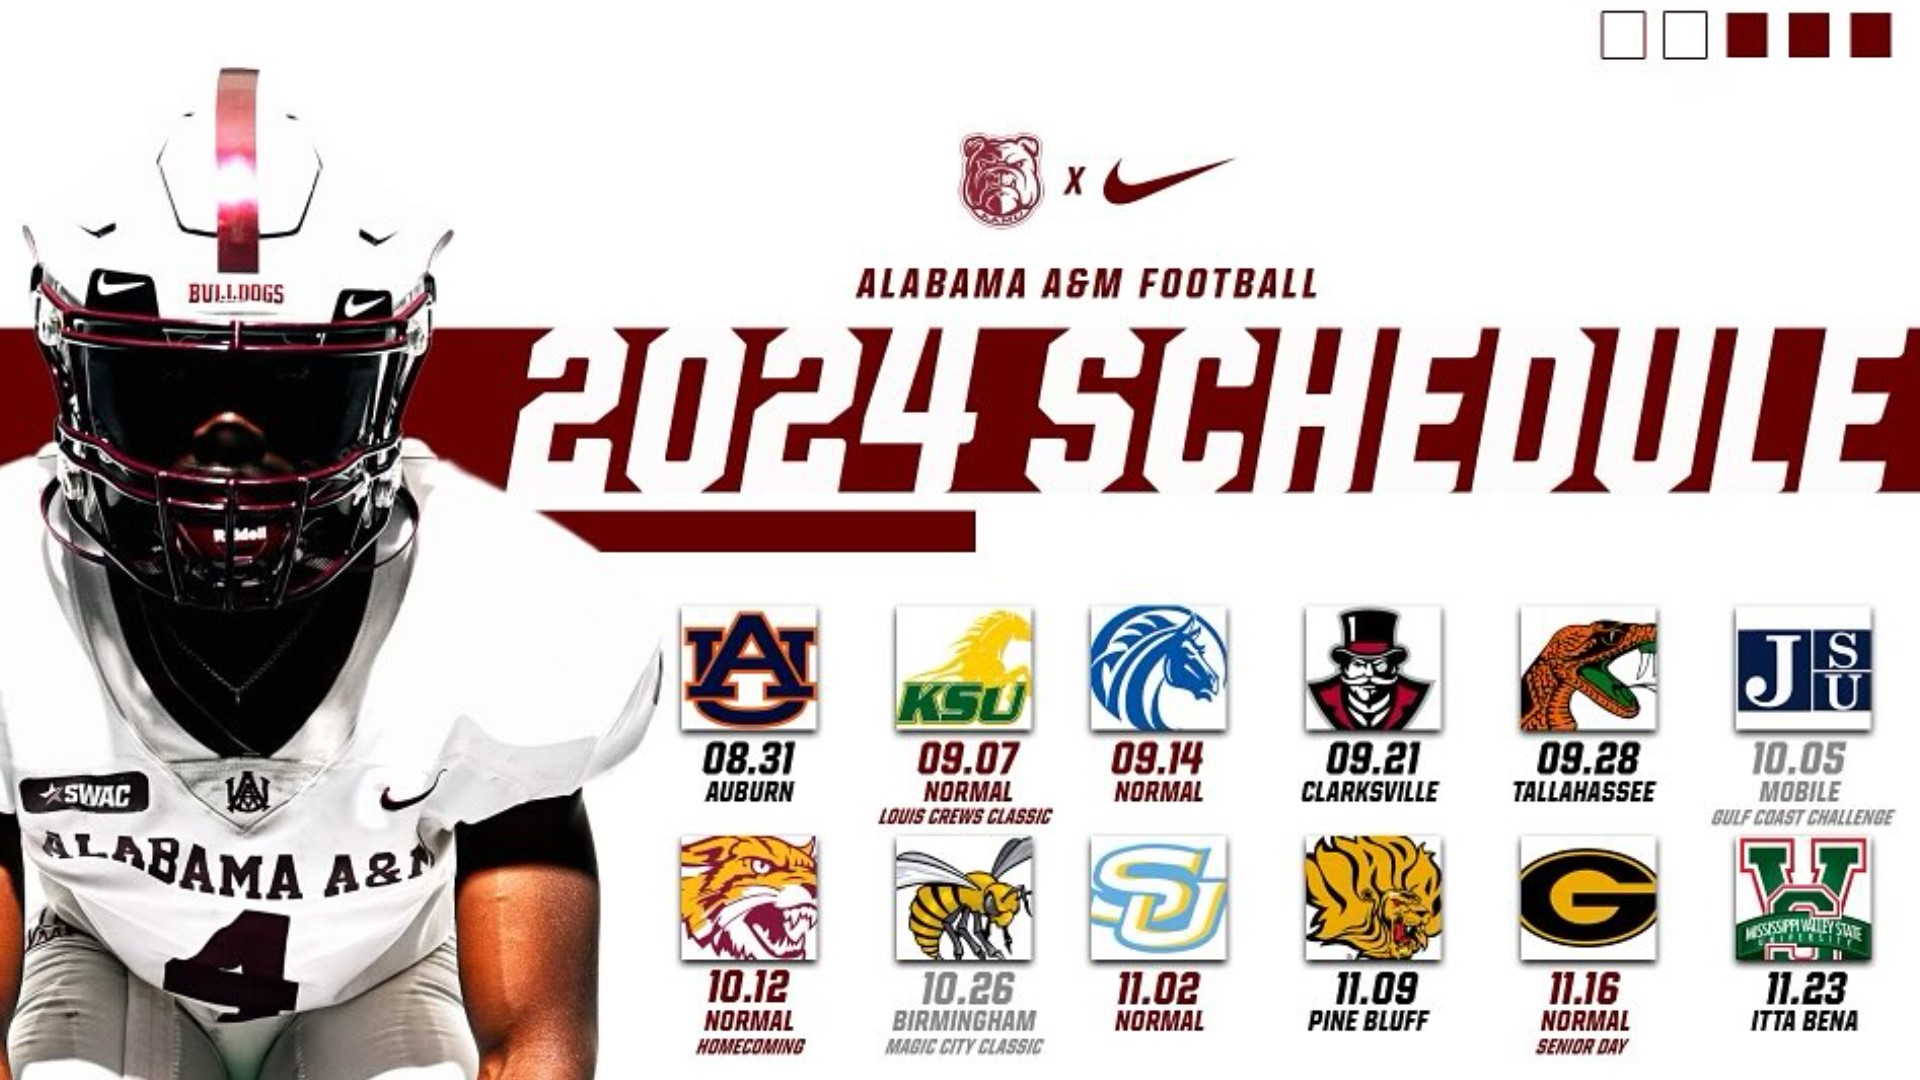 AAMU's 12-game schedule features a trip to an SEC opponent, three classic games, and a balanced matchup by the eight-game SWAC schedule.